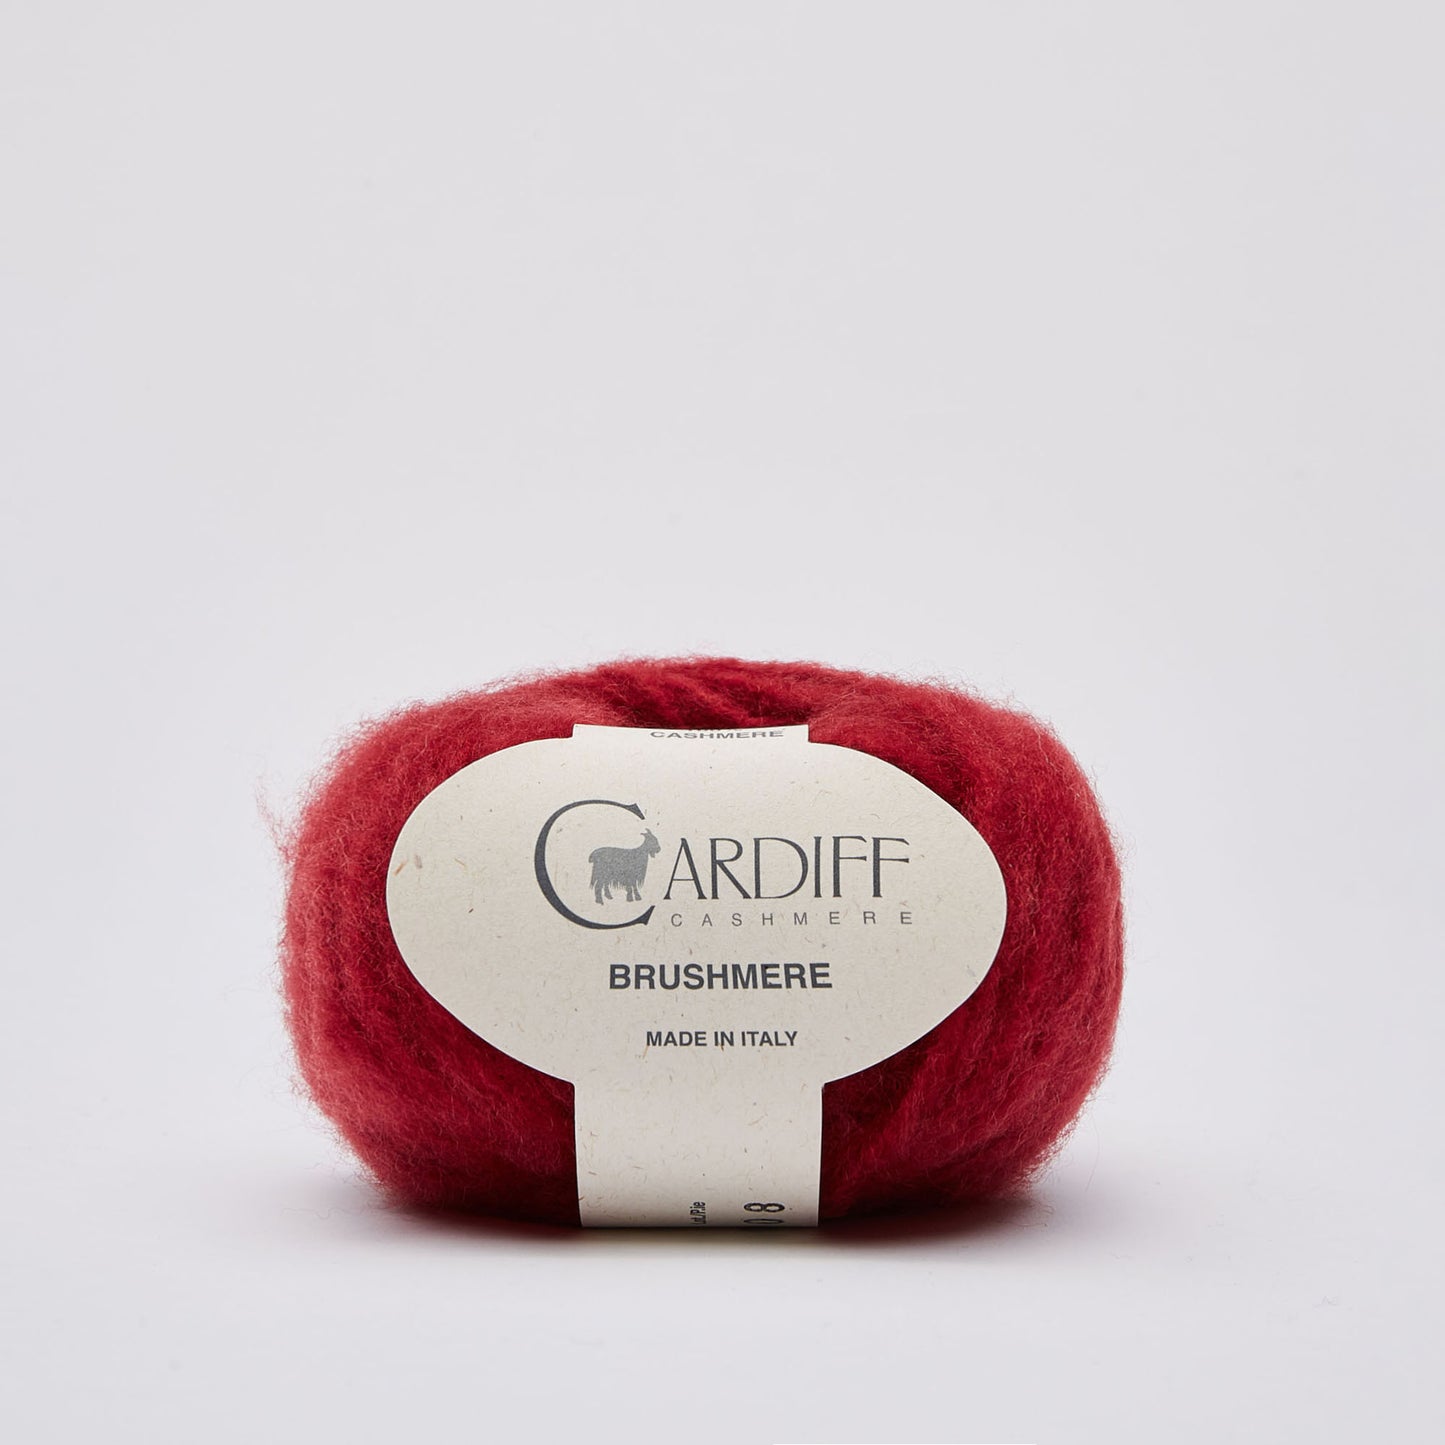 Cardiff BRUSHMERE gentle yarn, 111, ROUGE, comp: 100% Cashmere